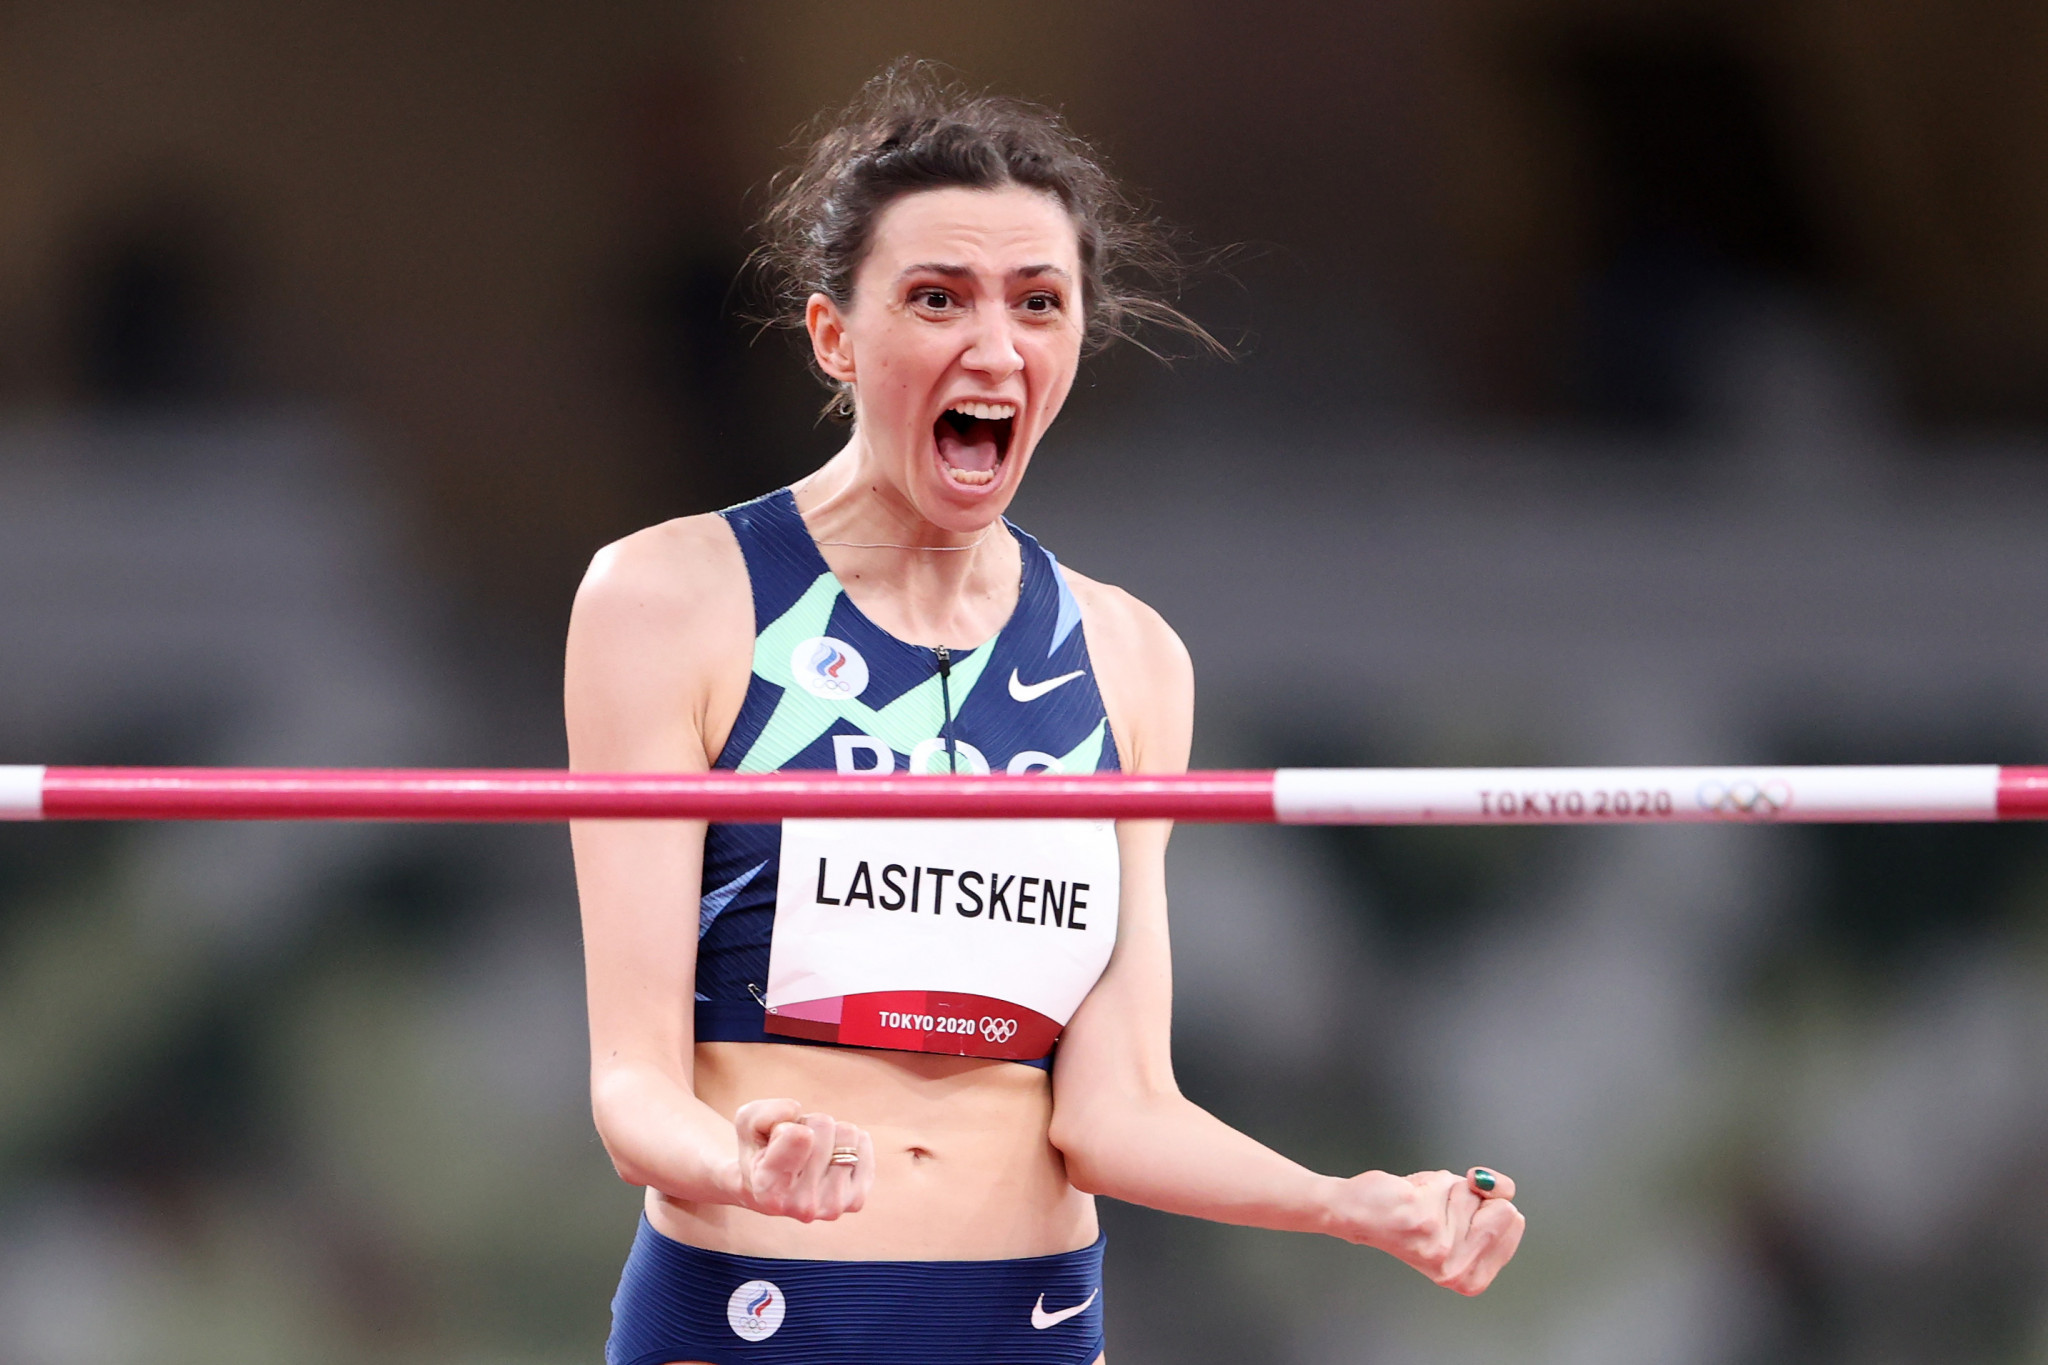 High jumper Mariya Lasitskene, representing the ROC, added Olympic high jump gold to her three world titles ©Getty Images